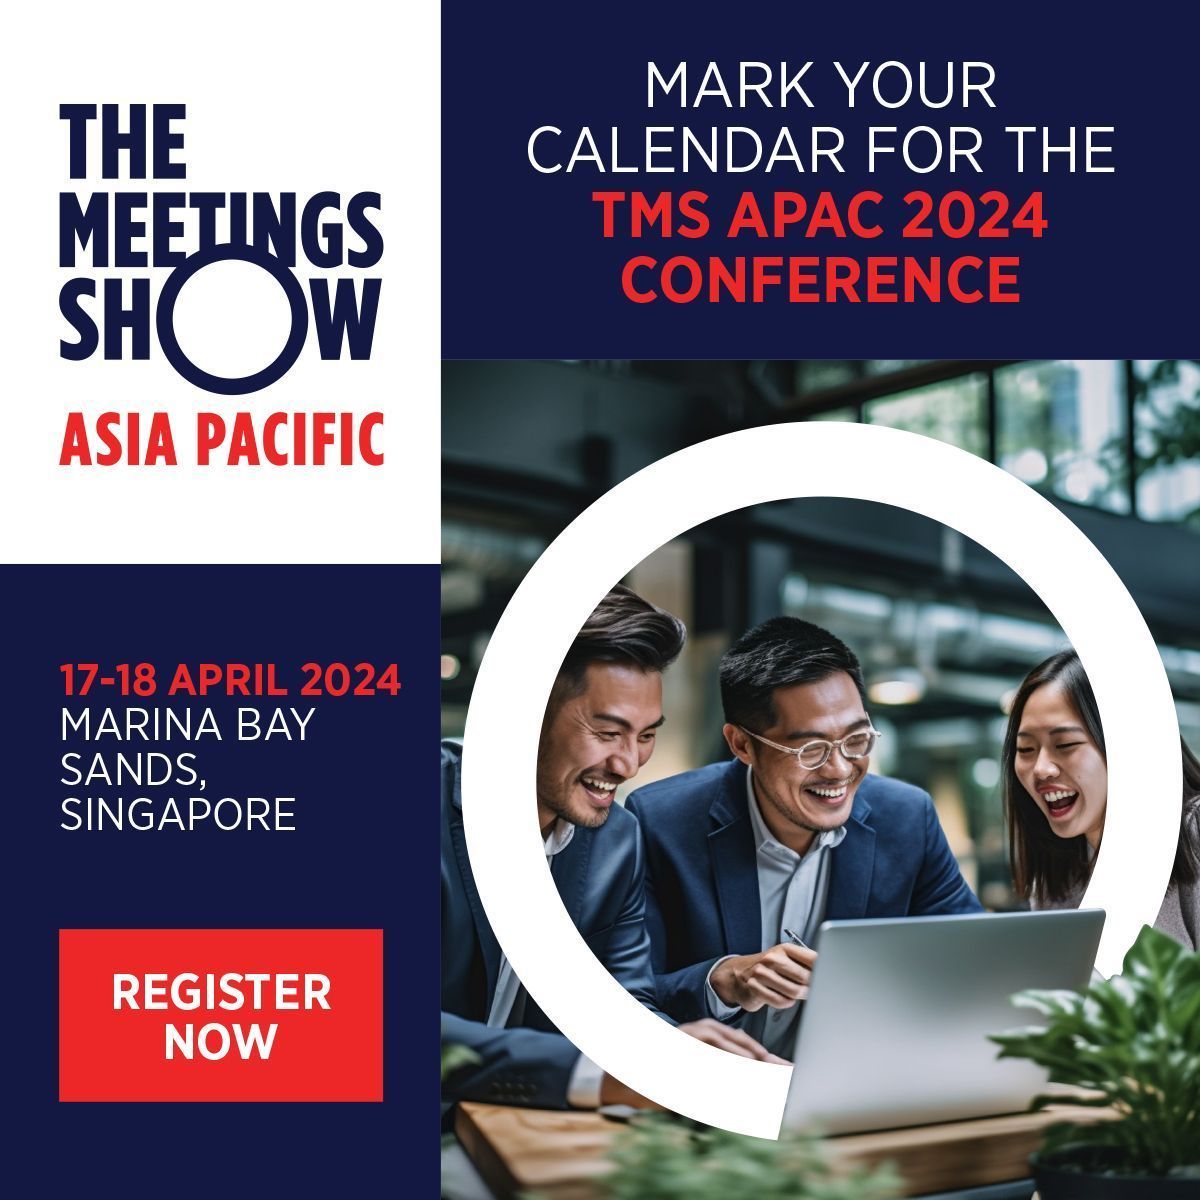 Only two weeks until @tmsapac!

📅 17-18 April 2024

Connect with MICE industry leaders, be inspired by the lineup of industry experts and thought leaders who will be sharing their insights and expertise.

Secure your spot today: shorturl.at/uBK04